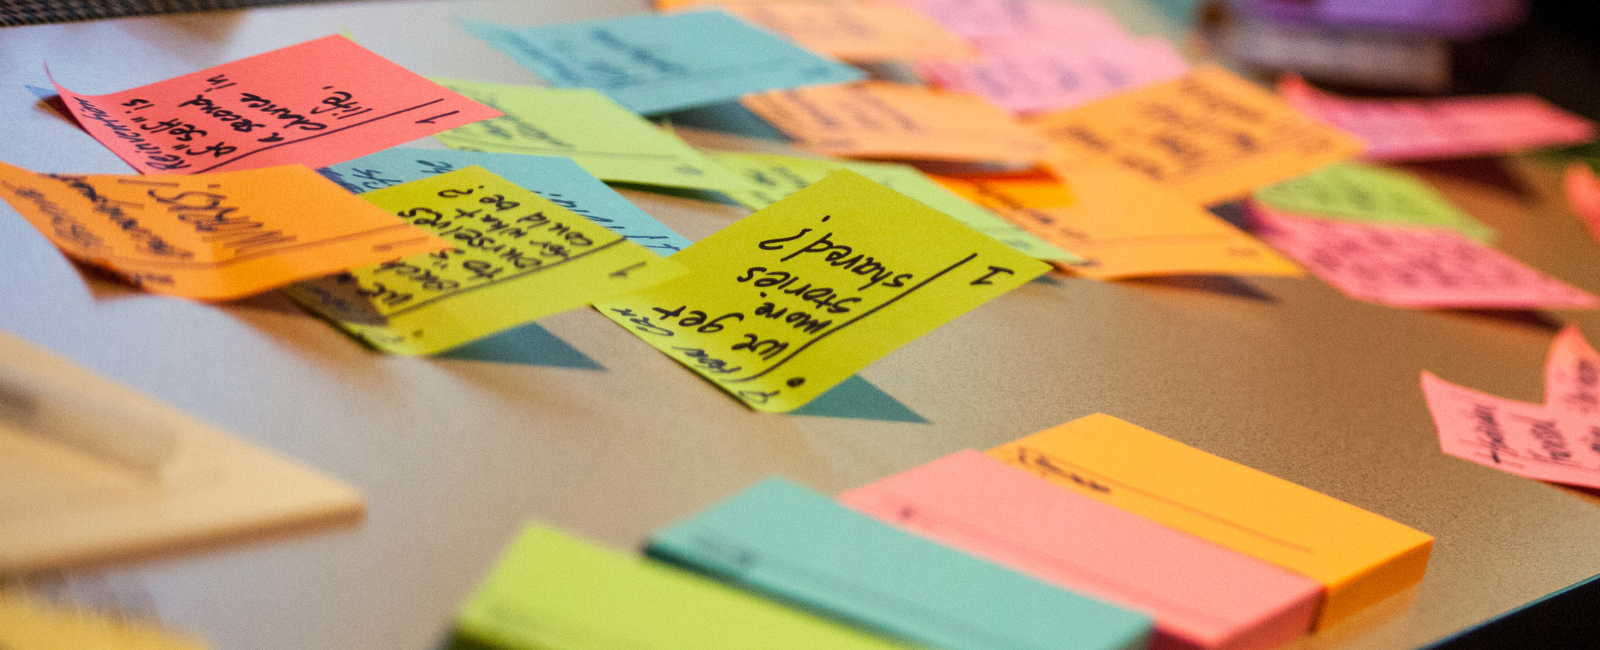 Picture of post-it notes.